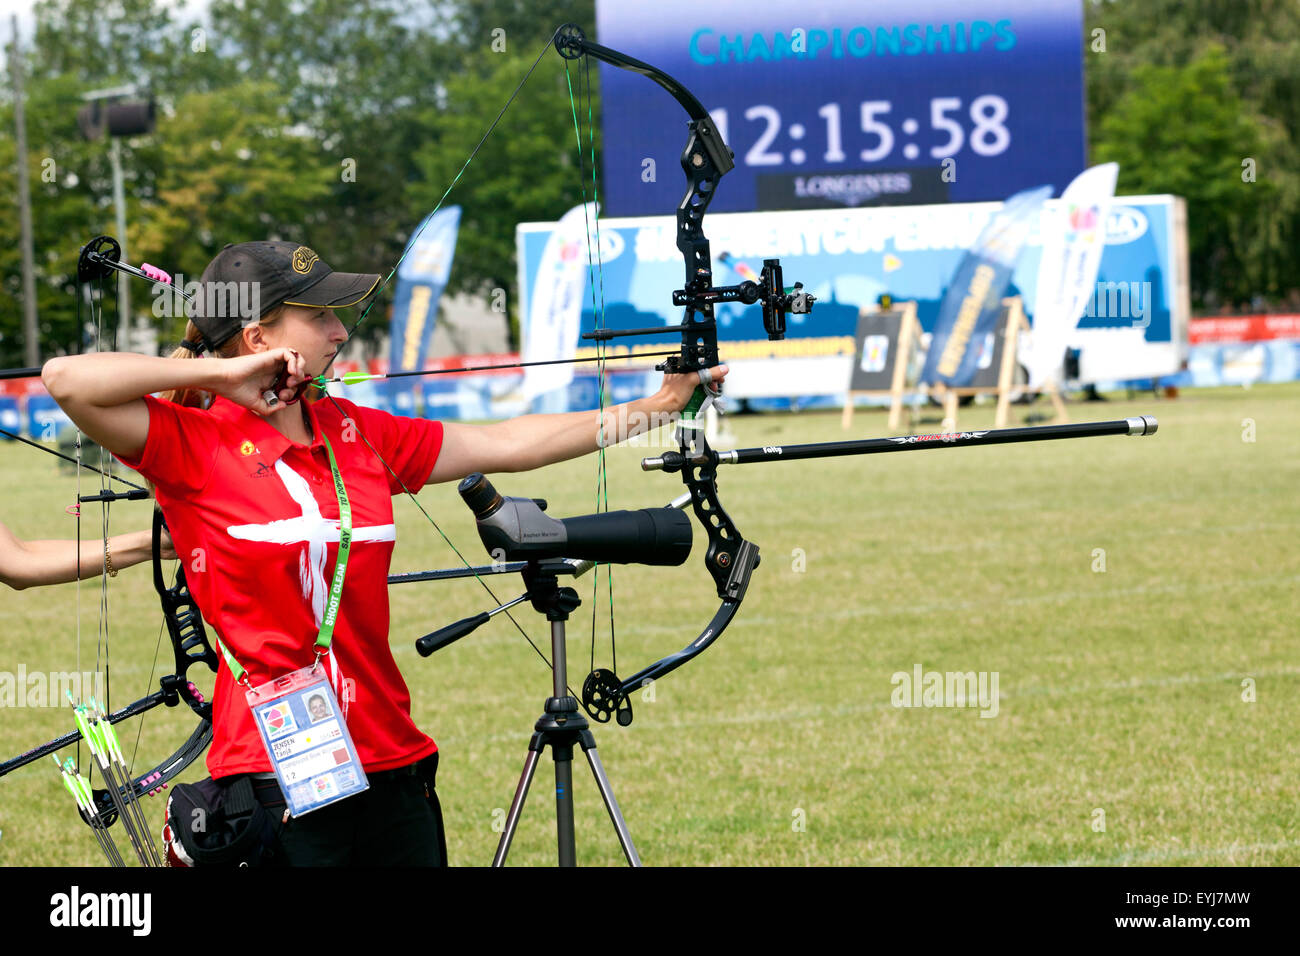 Copenhagen, Denmark, July 30th, 2015: Danish archer Tanja Jensen competes in the World Archery Championships in Copenhagen during Thursday's individual matches  in compound bow. Credit:  OJPHOTOS/Alamy Live News Stock Photo